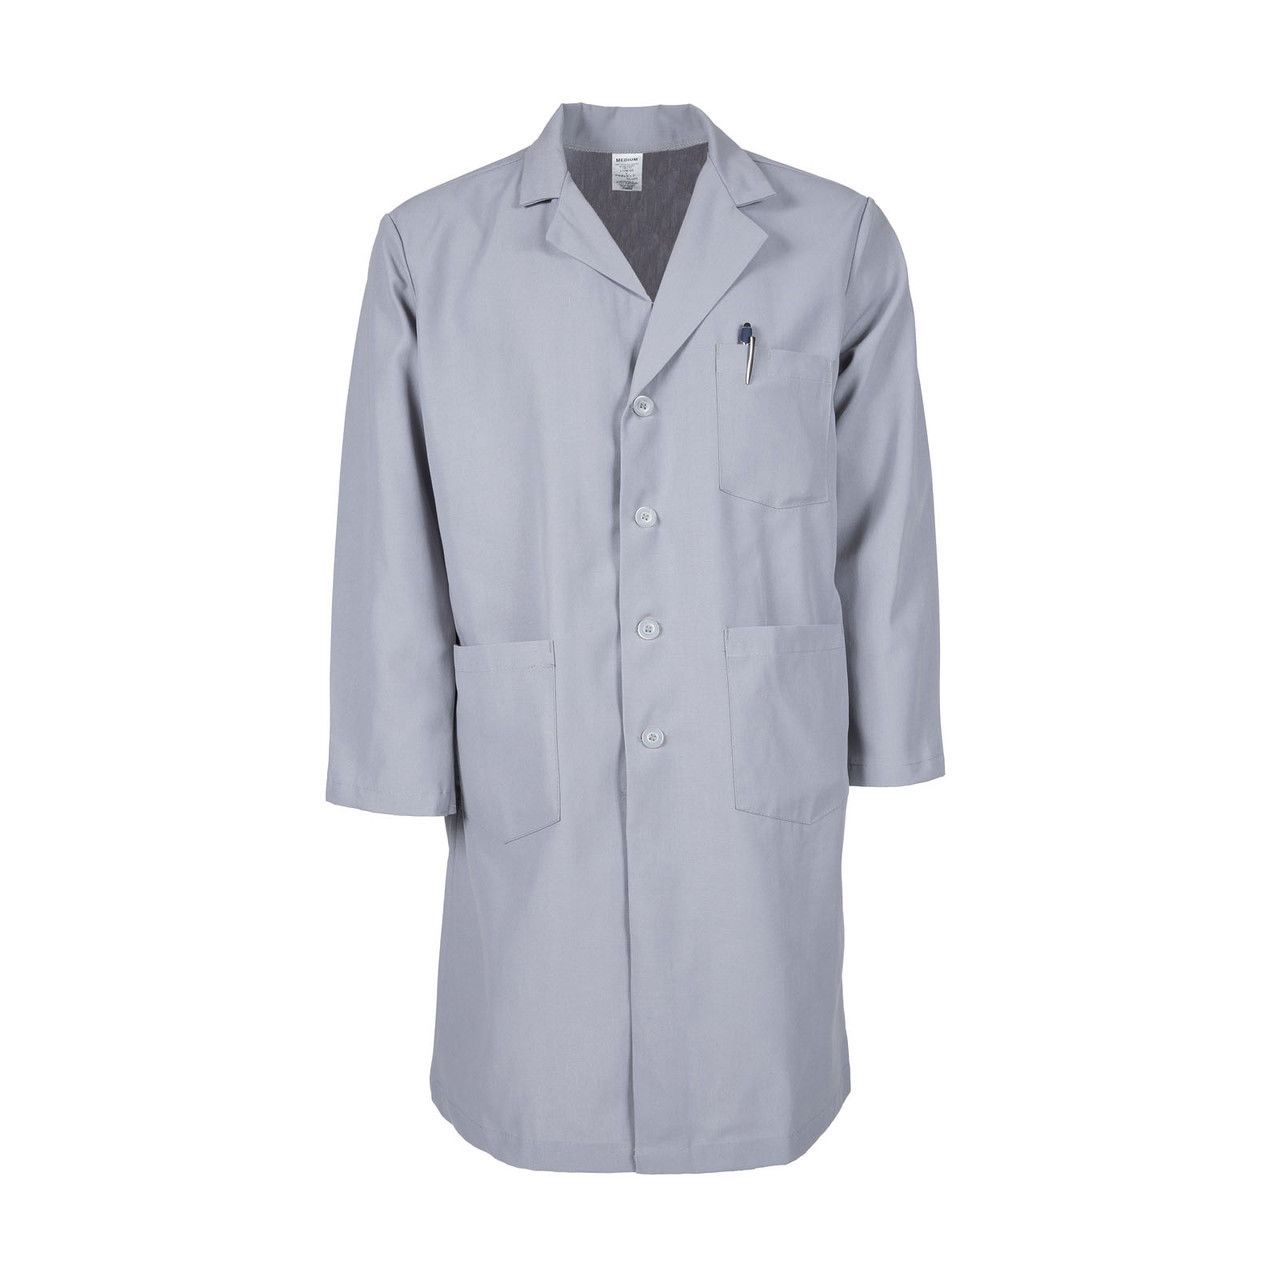 Where are the pockets located on the gray lab coat for men and how many are there?